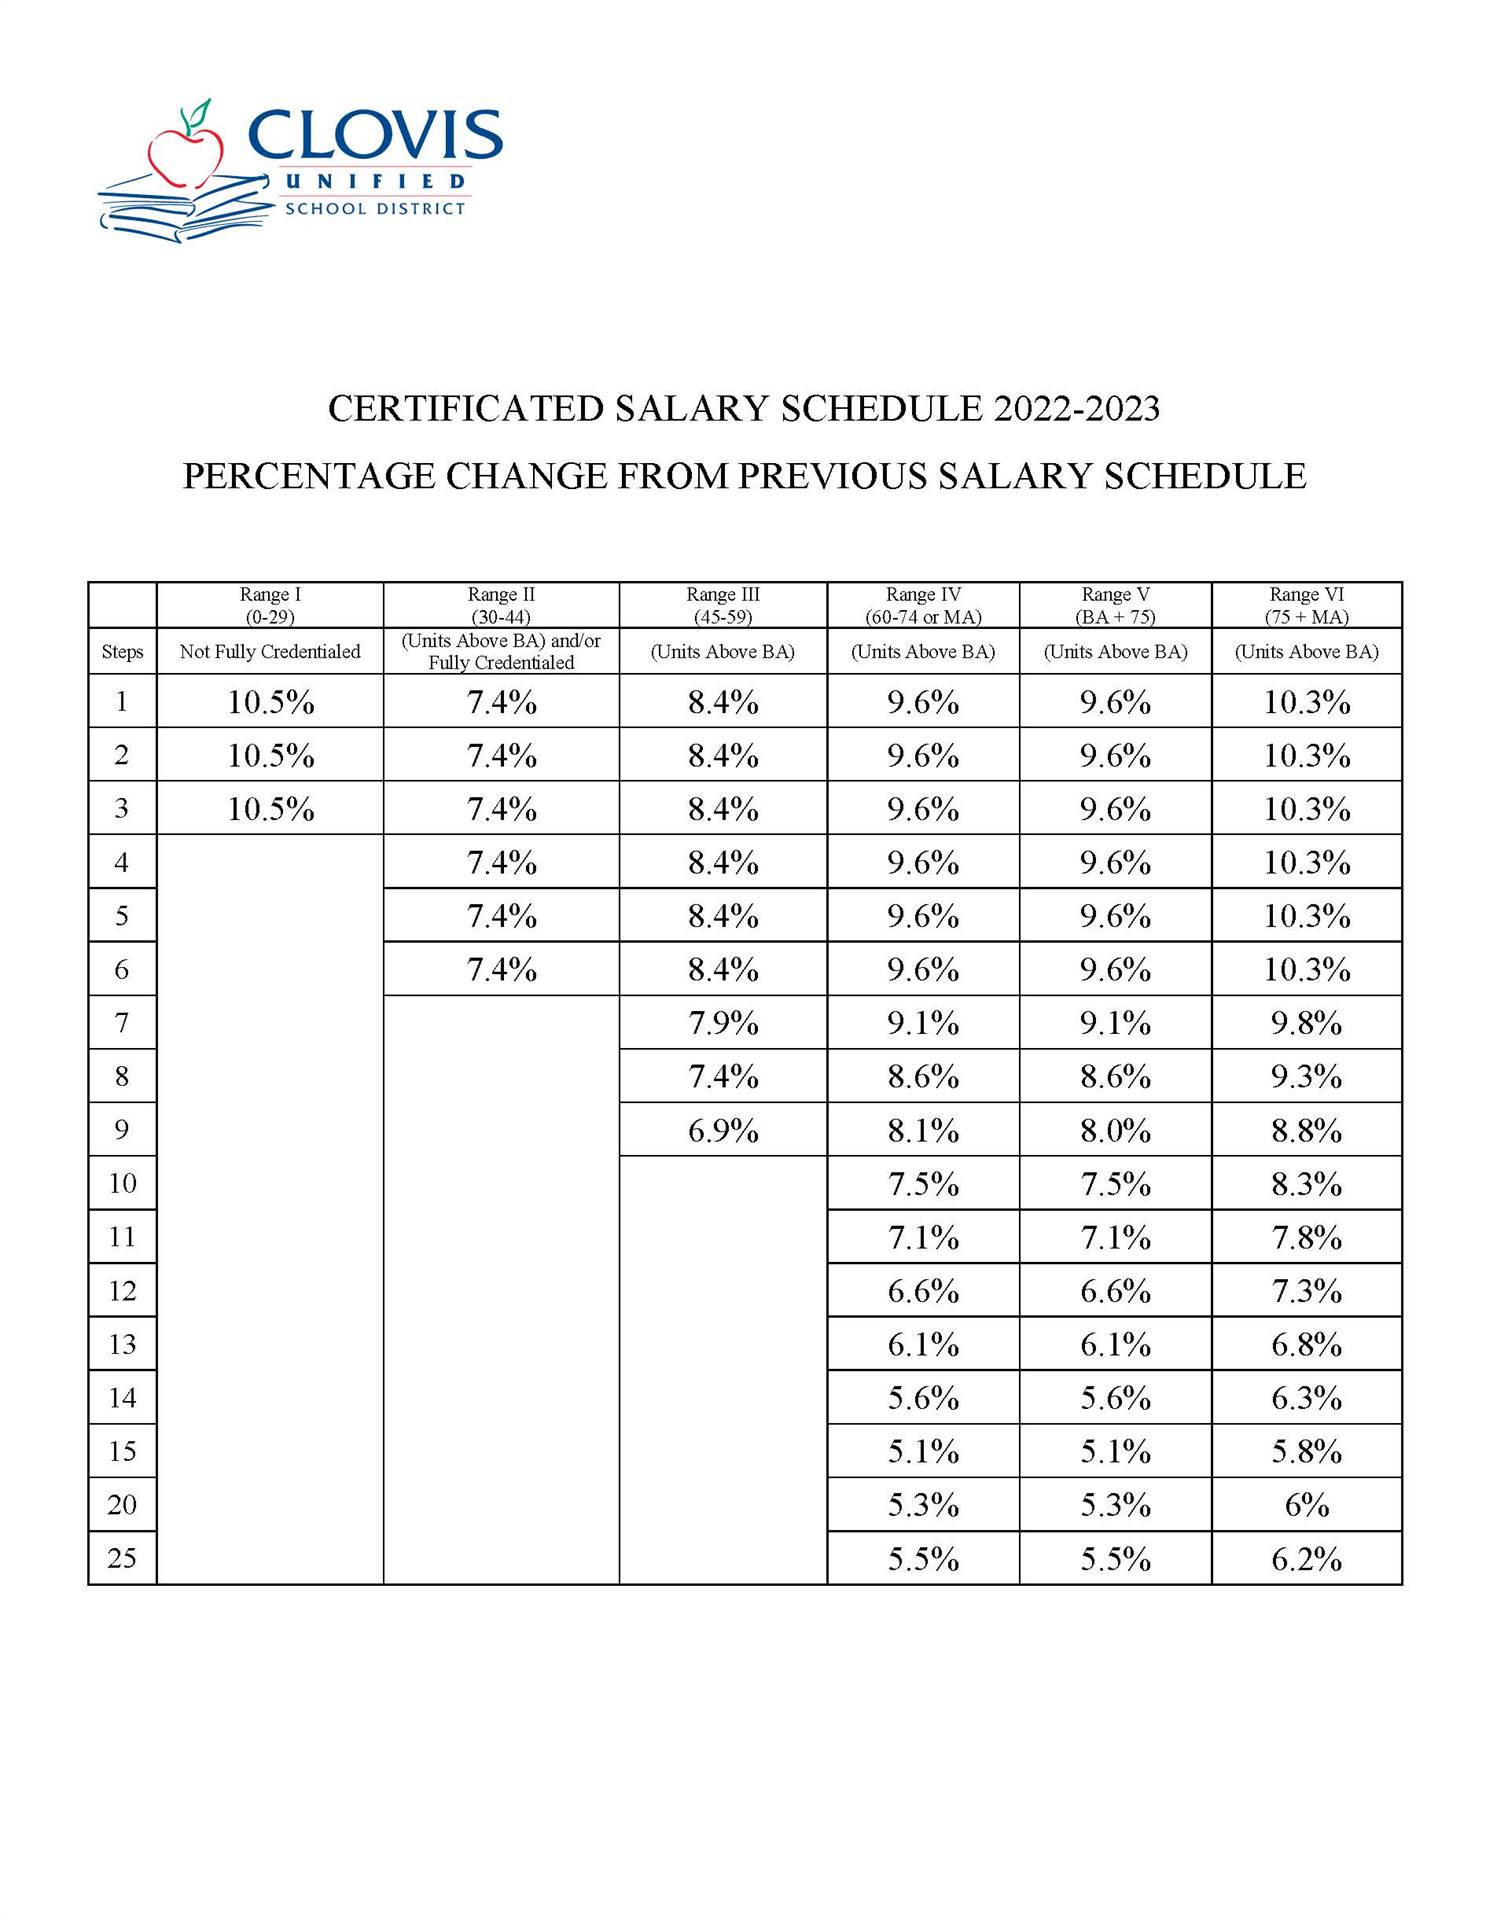 Certificated Salary Schedule Percentage Change